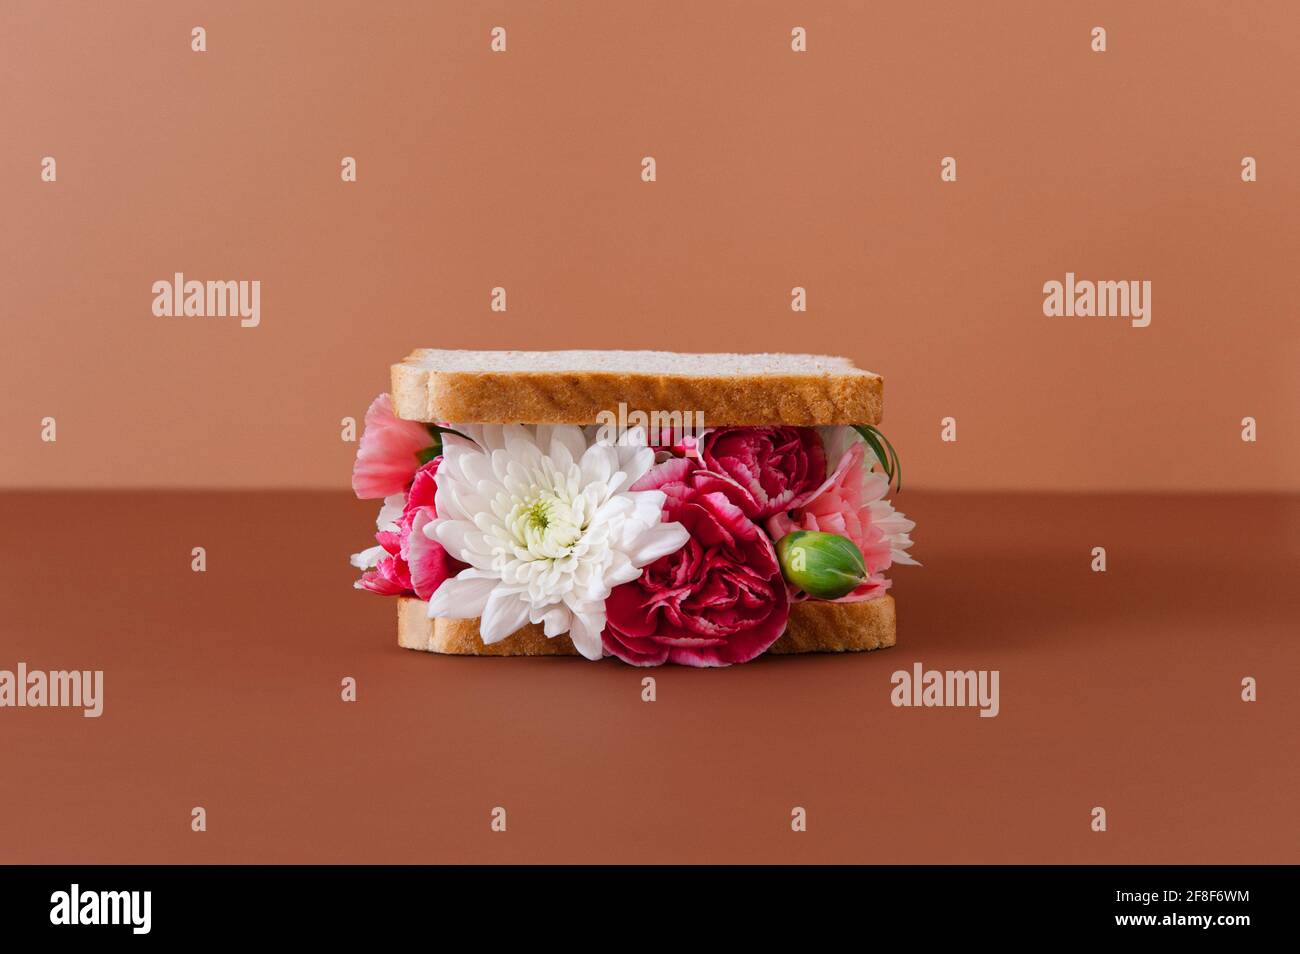 The creative conceptual sandwich is made with various flowers on the pastel background. Minimal summer food theme. Stock Photo